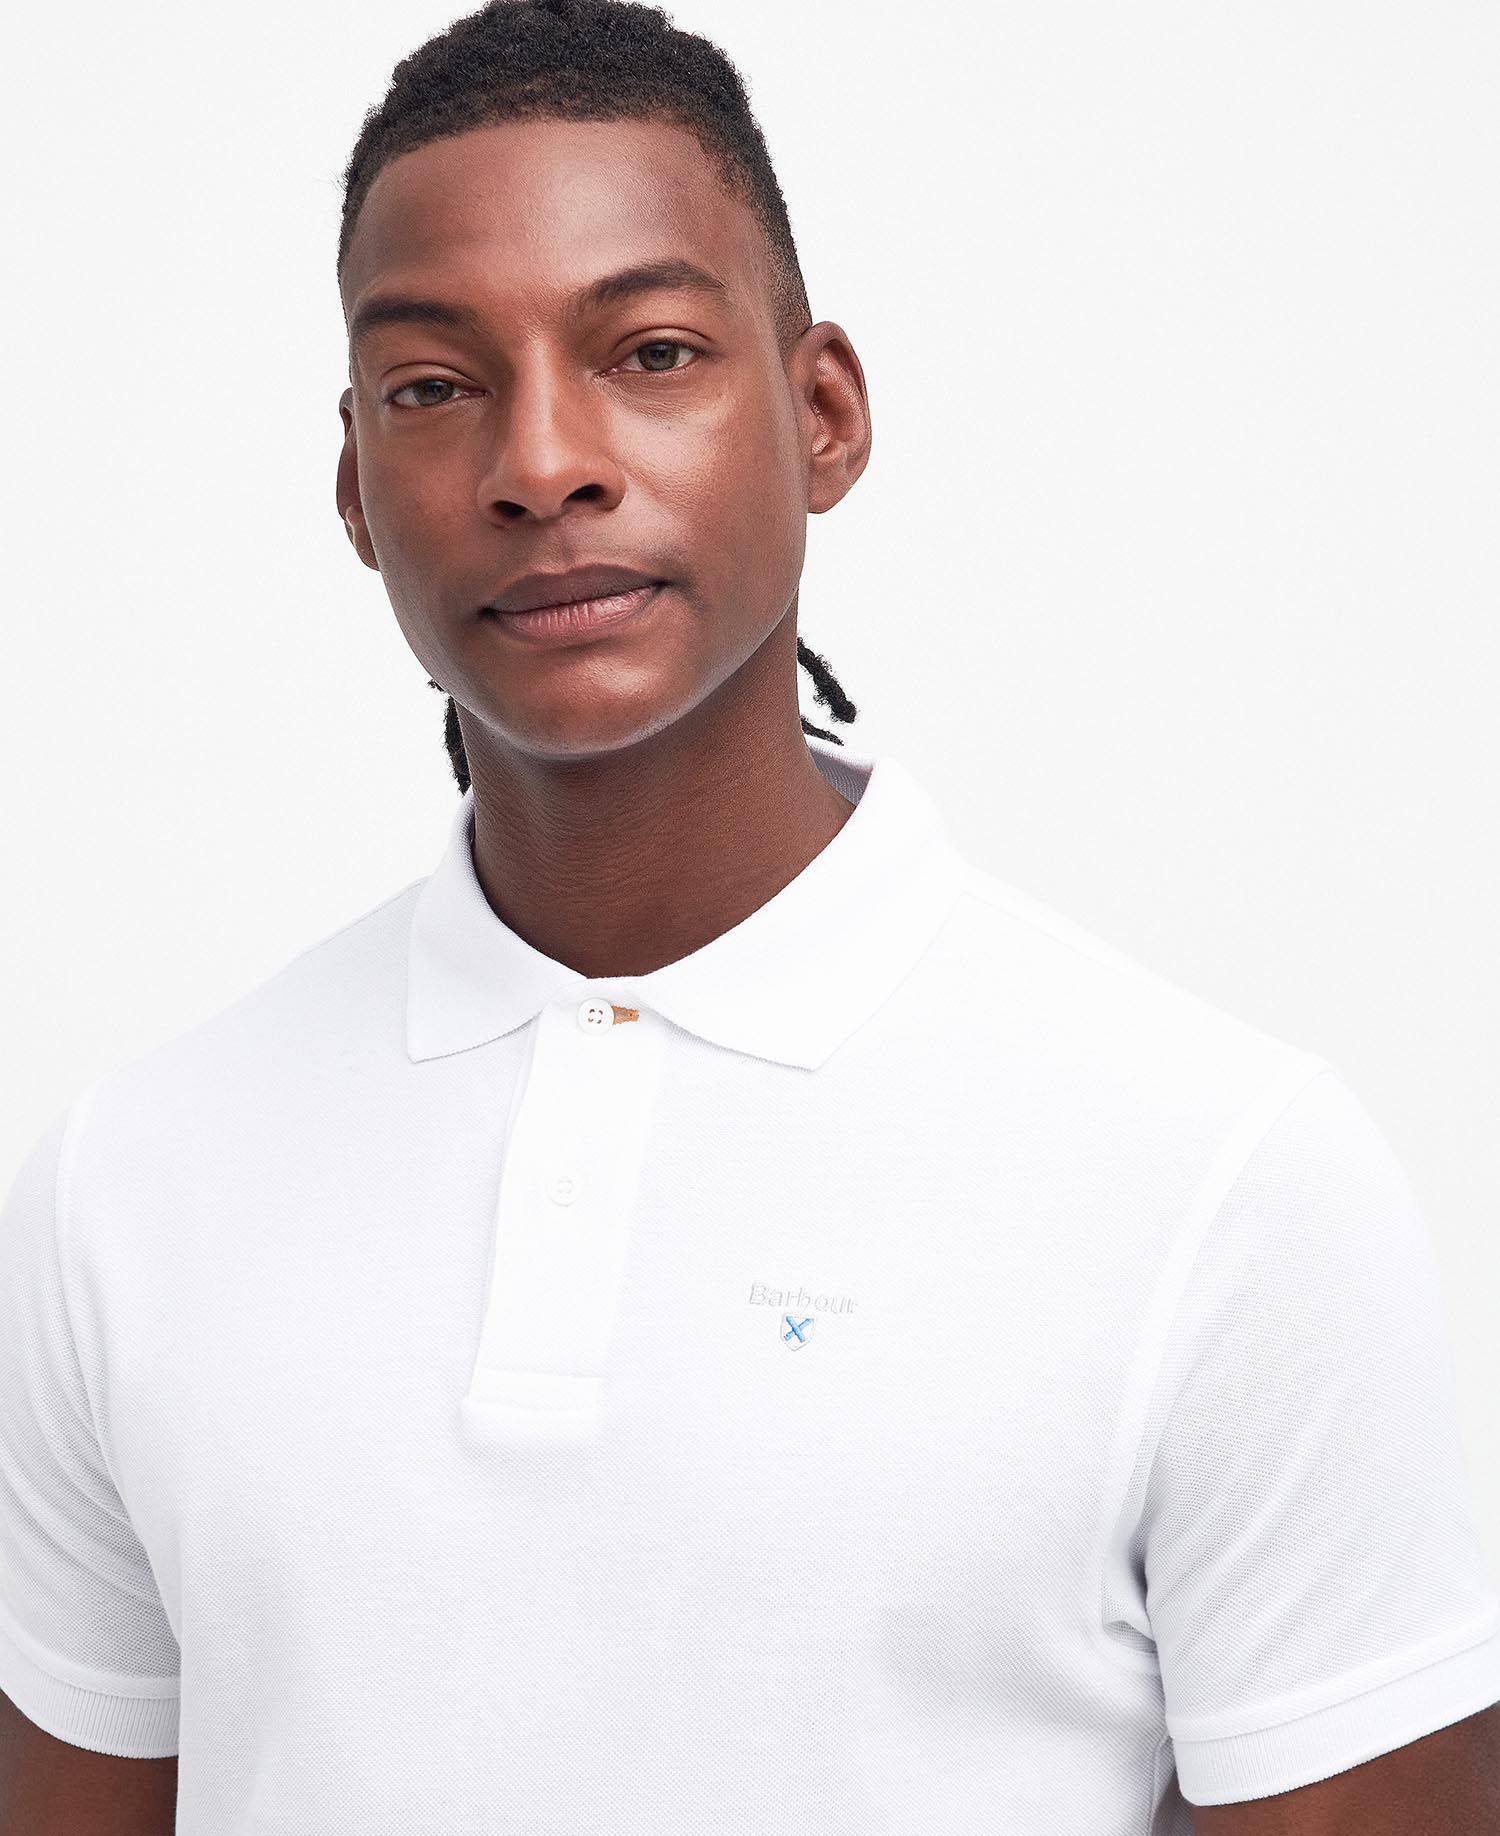 Barbour Sports Polo in White | Barbour